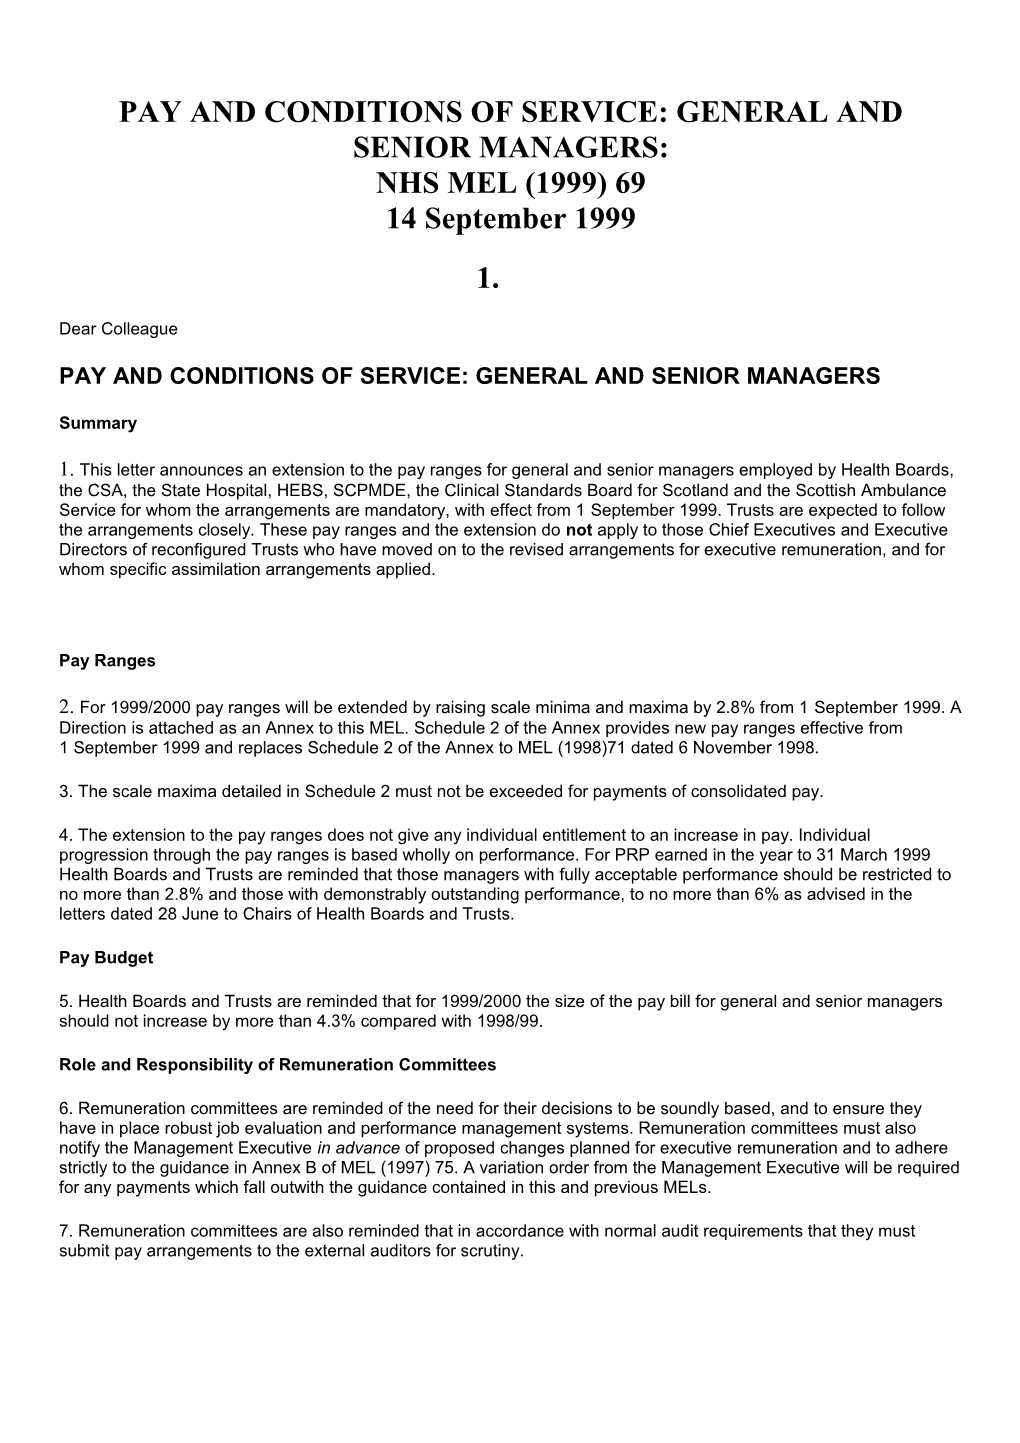 Pay and Conditions of Service: General and Senior Managers